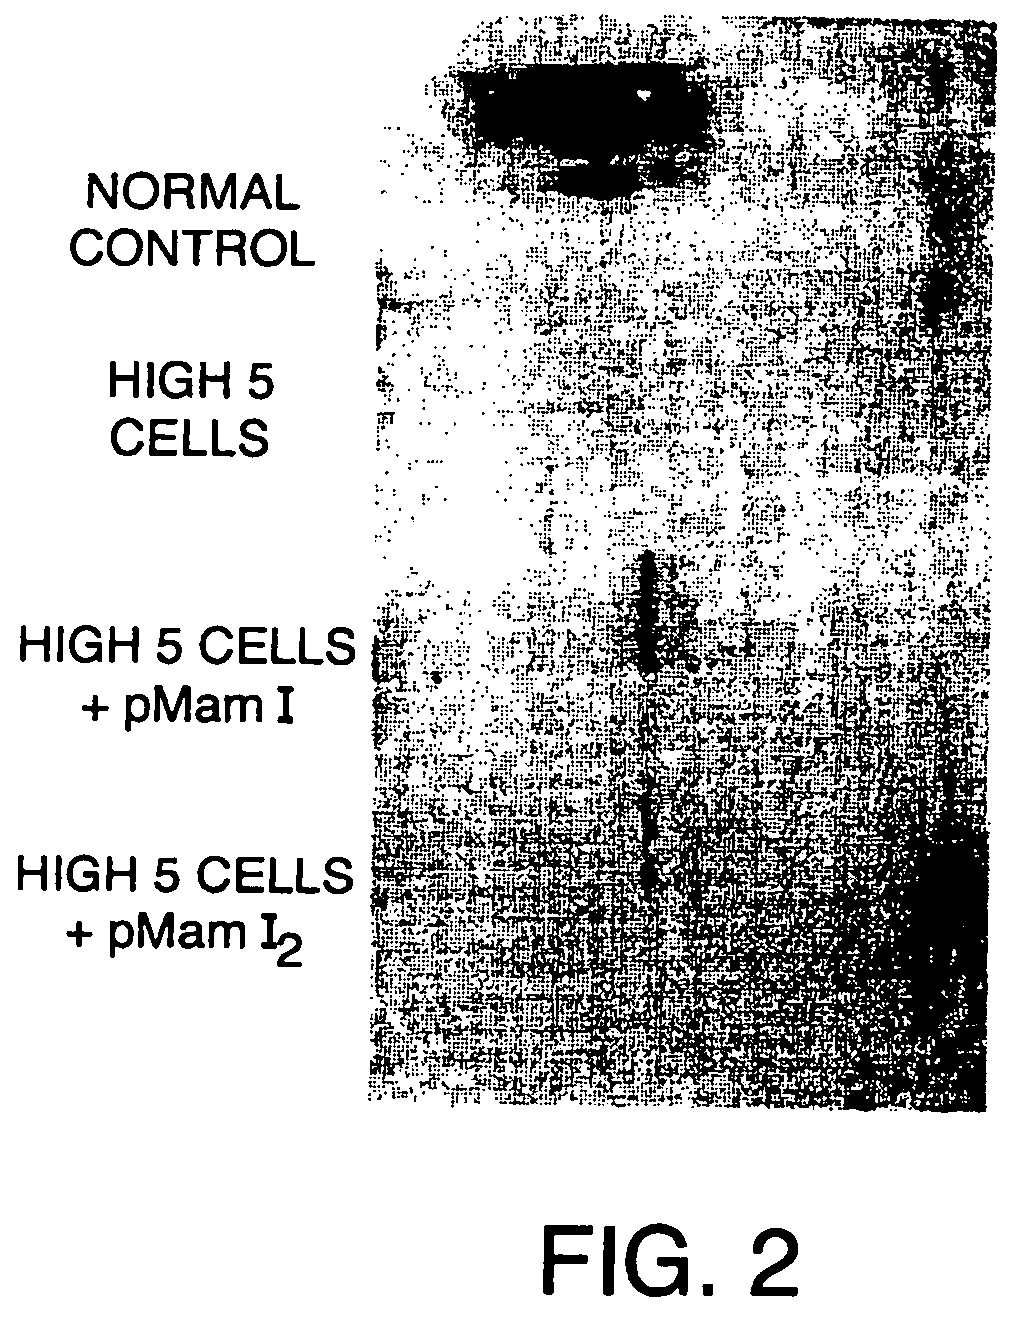 Nucleotide and protein sequence of mammastatin and methods of use